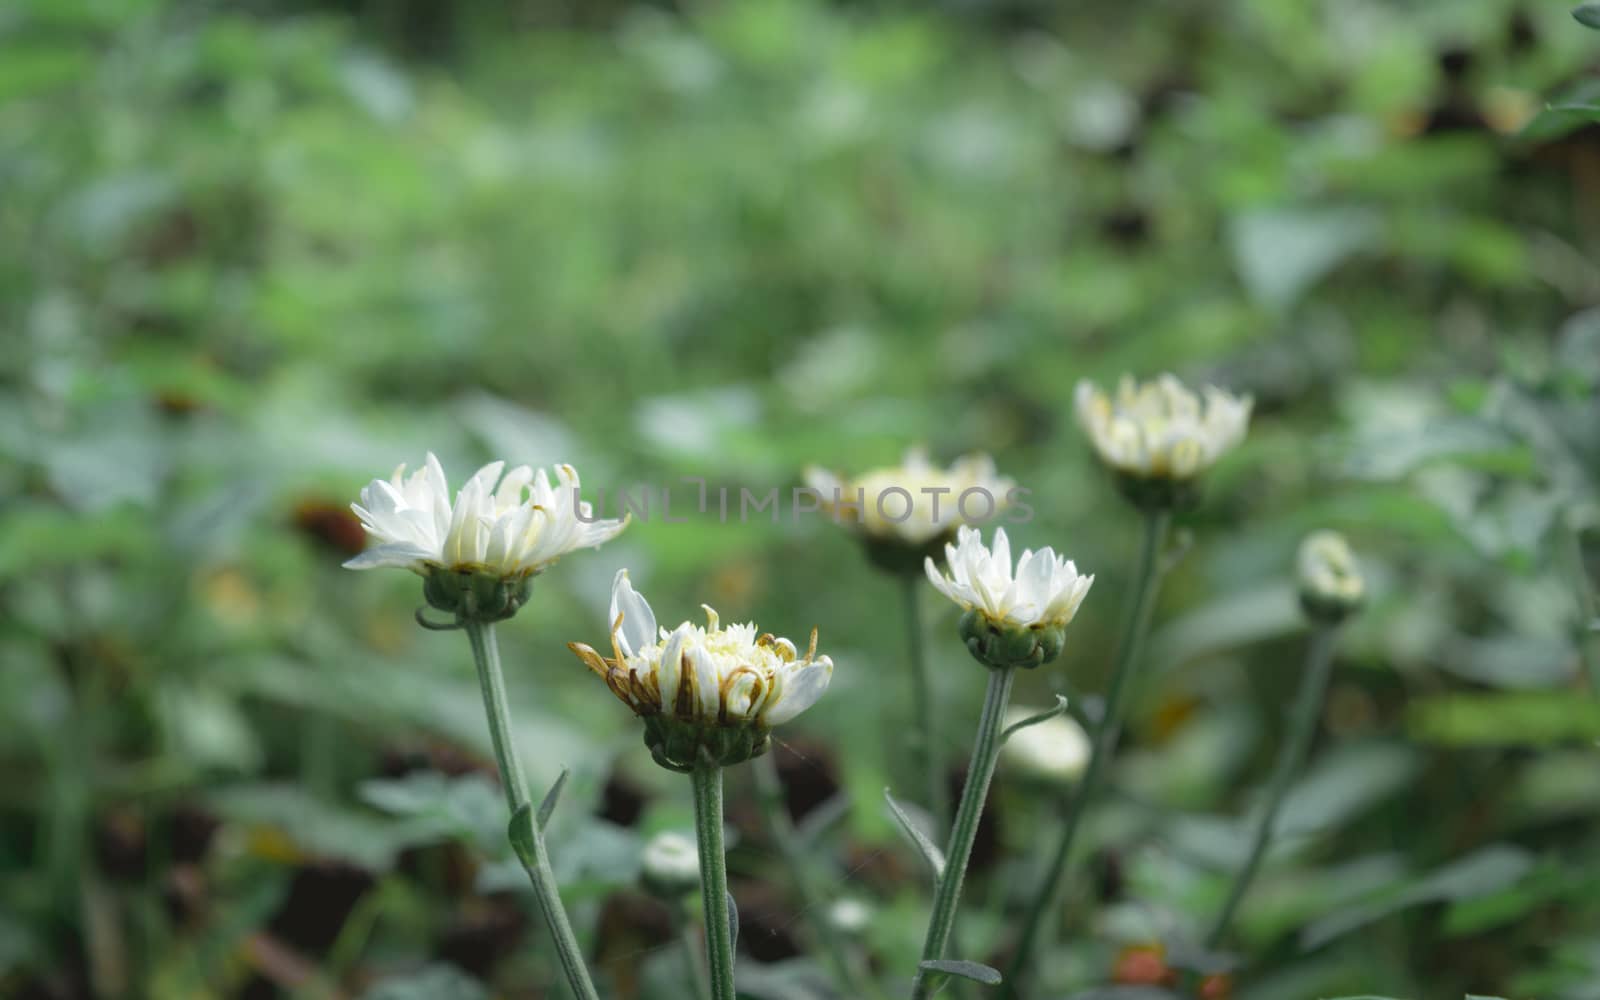 Closeup beautiful small cute flower of yellow pollen and white petal of Common Daisy, Lawn Daisy, Bellis Perennis, Woundwort, Bruisewort or English Daisy variegated foliage spot in rural environment. Shibpur Howrah botanical garden West Bengal India South Asia Pacific.